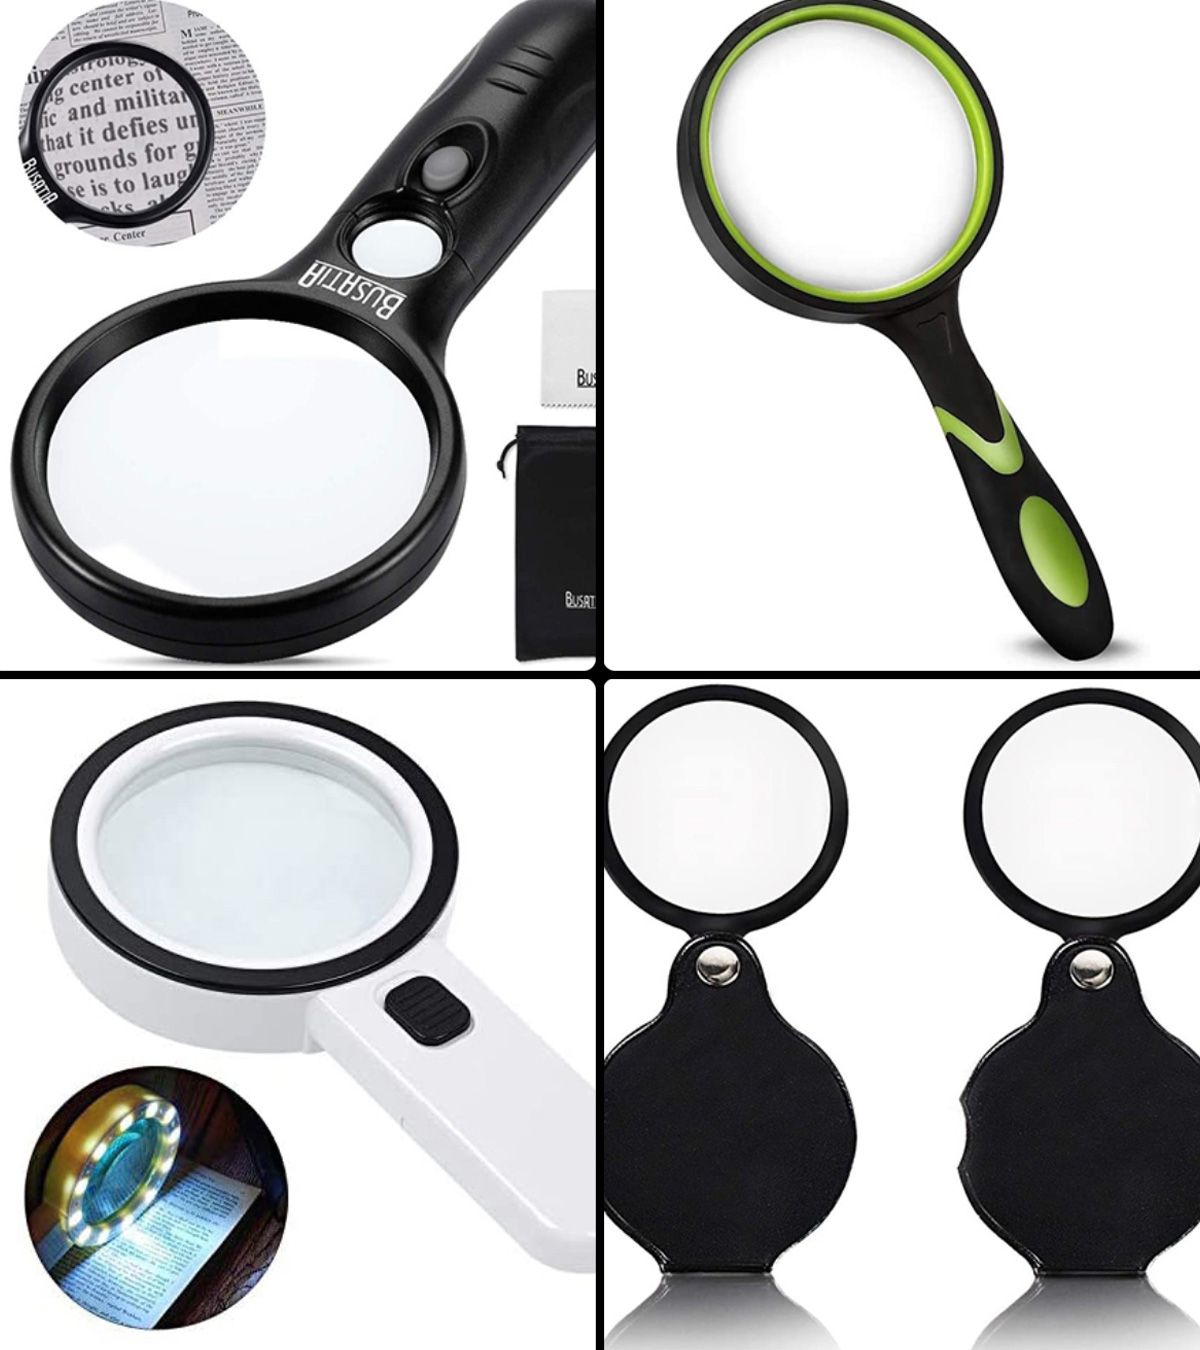 High Quality beauty salon magnifying glass with light For Varied